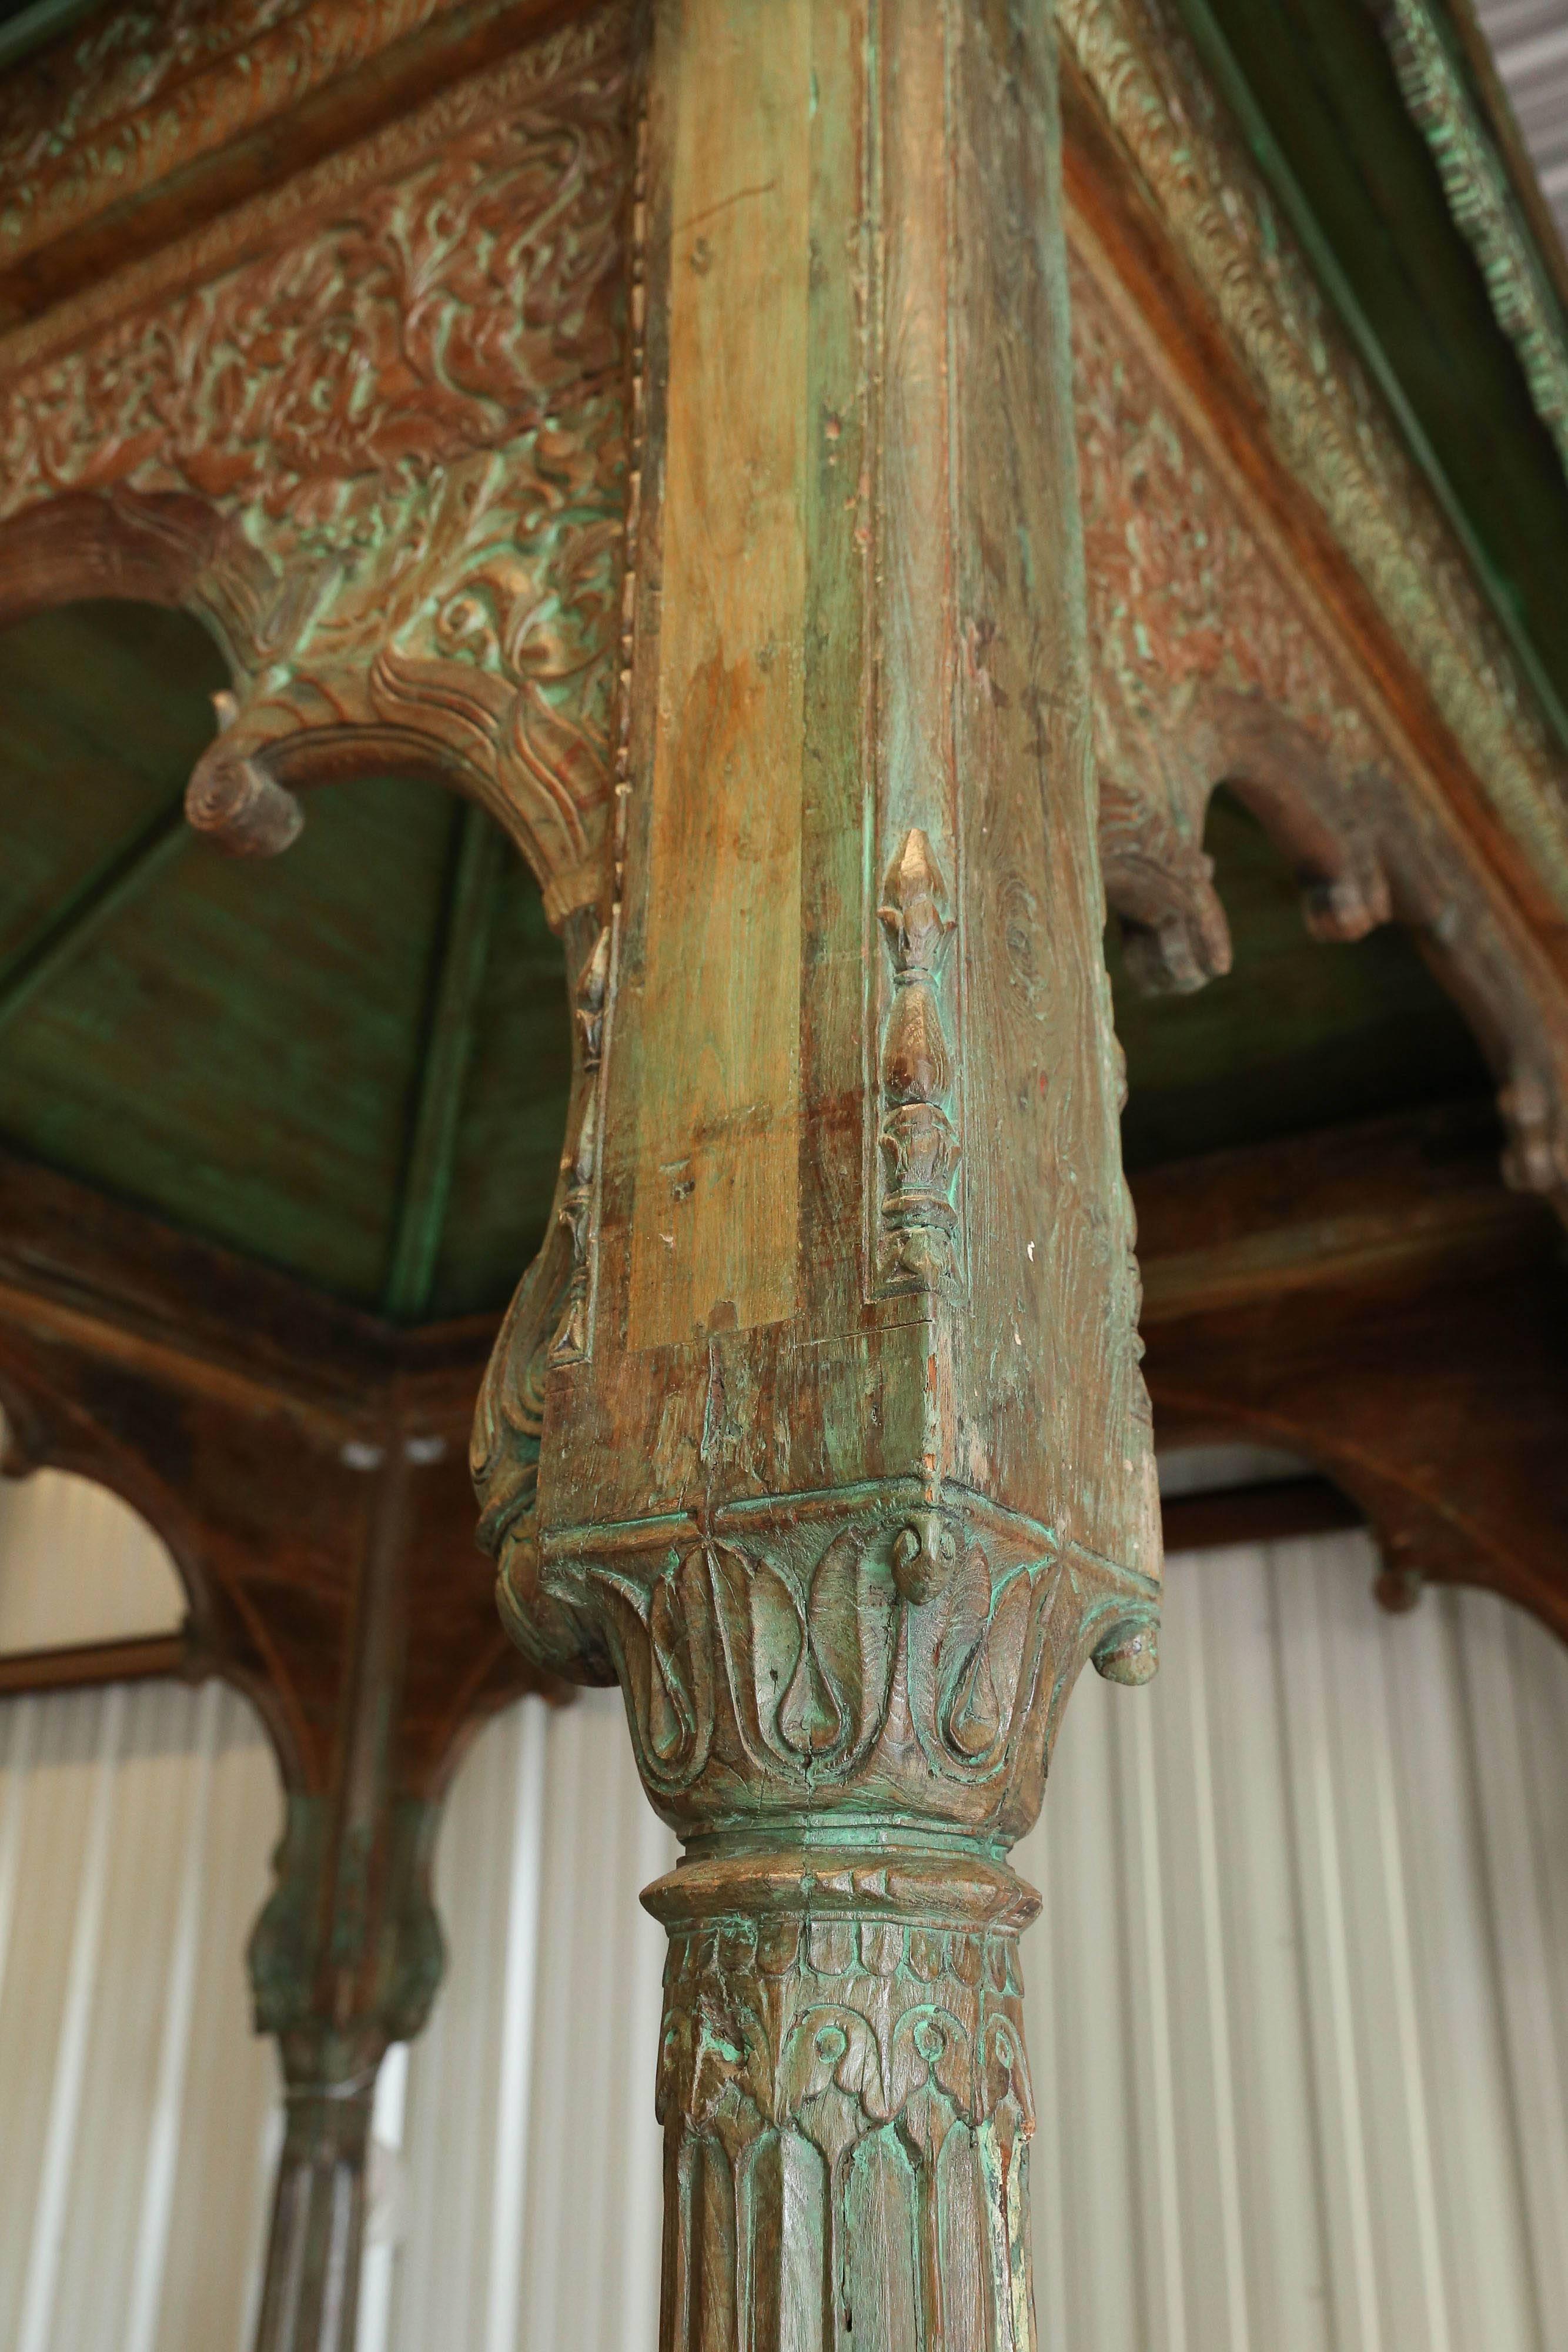 This highly carved rot resistant late 19th century Gazebo once adorned the entrance of a large village temple in central India. The four pillars that support the conical roof and the arches are tastefully carved in ethnic motif. It housed a Hindu